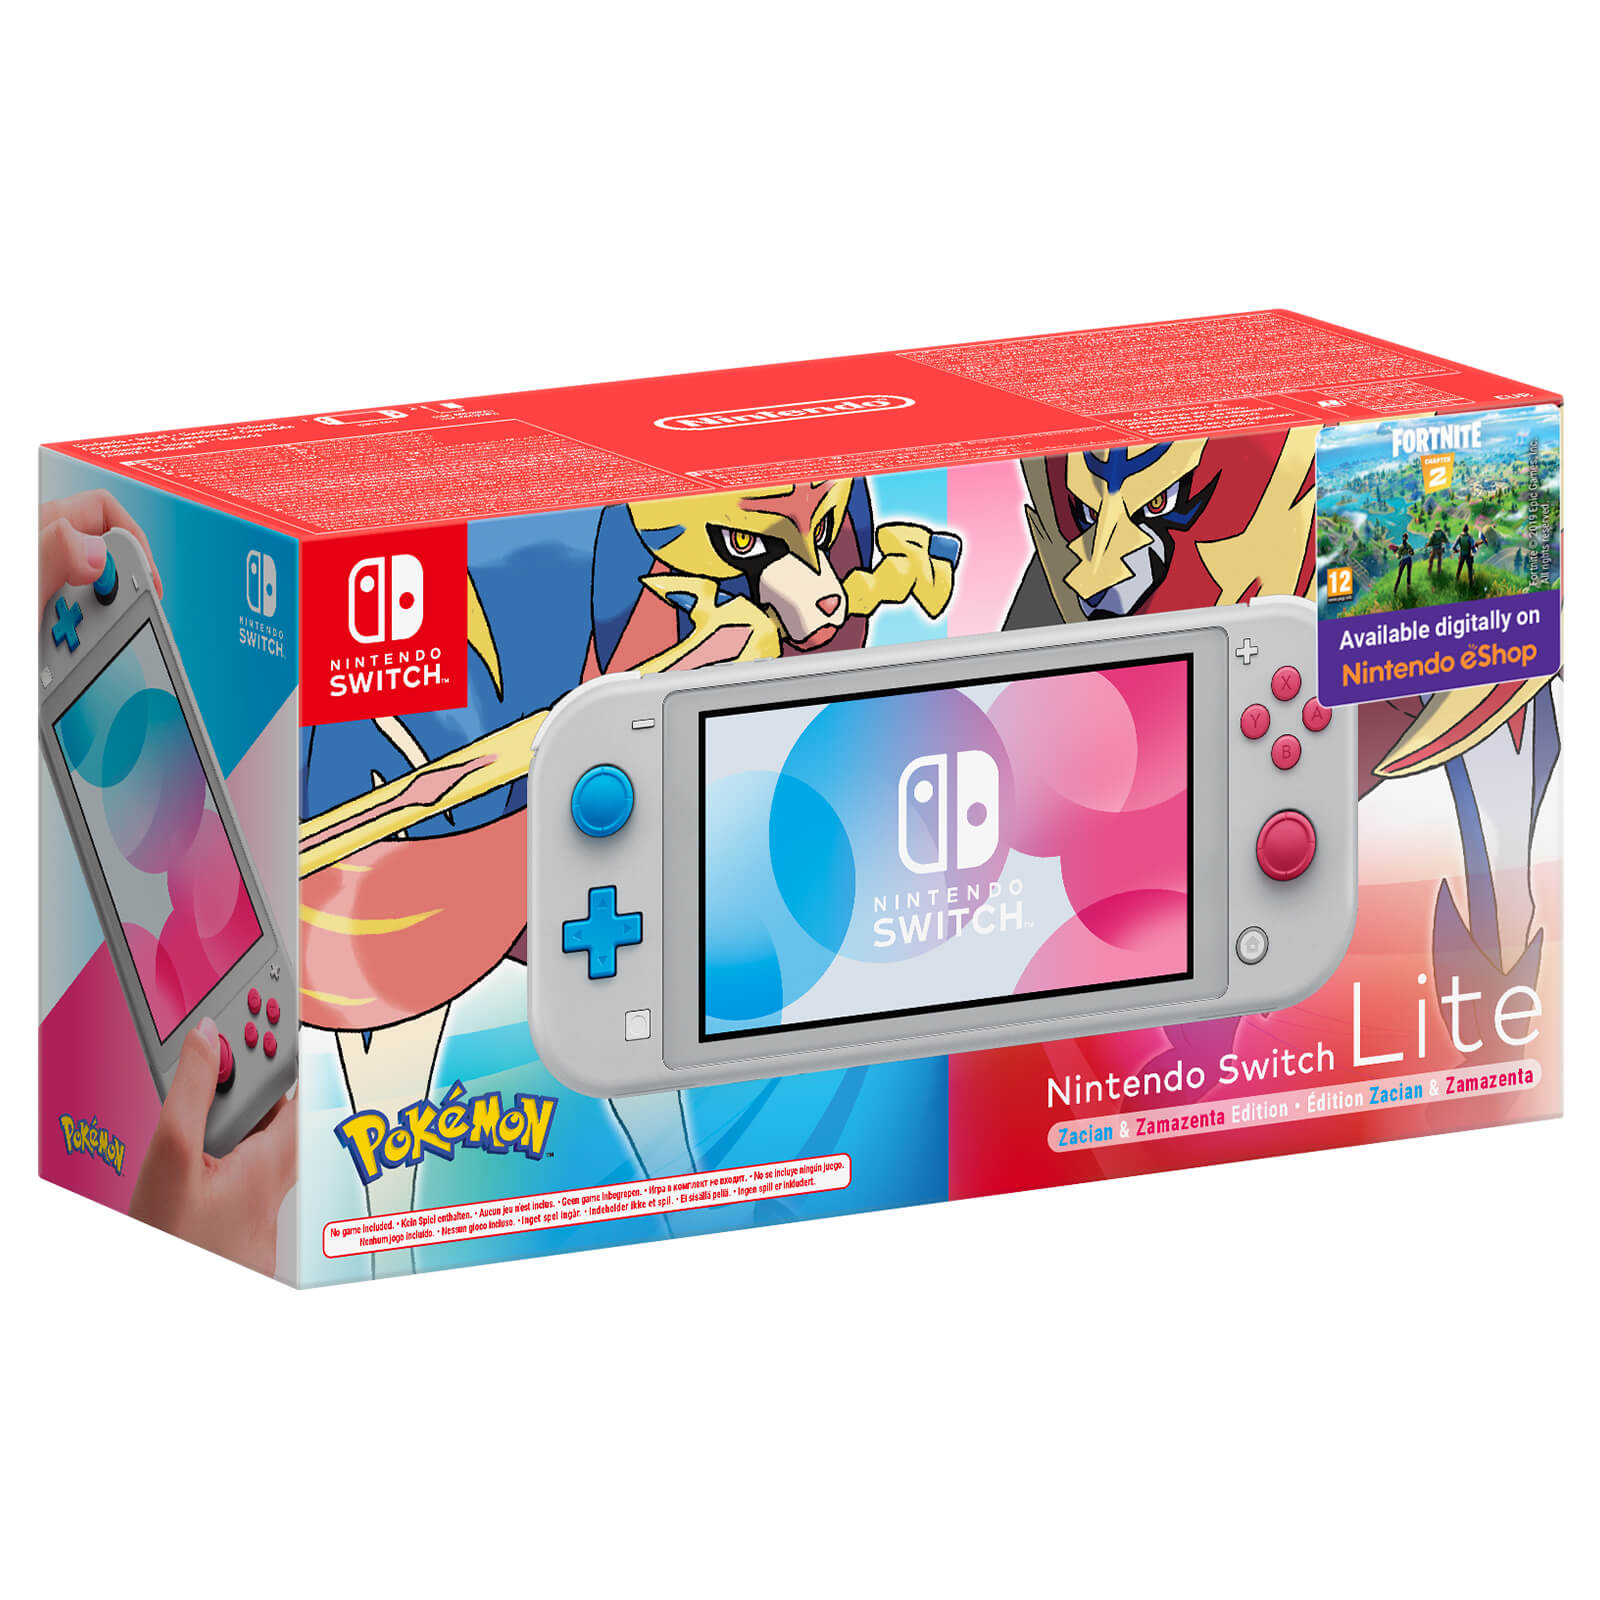 can you get fortnite on a nintendo switch lite